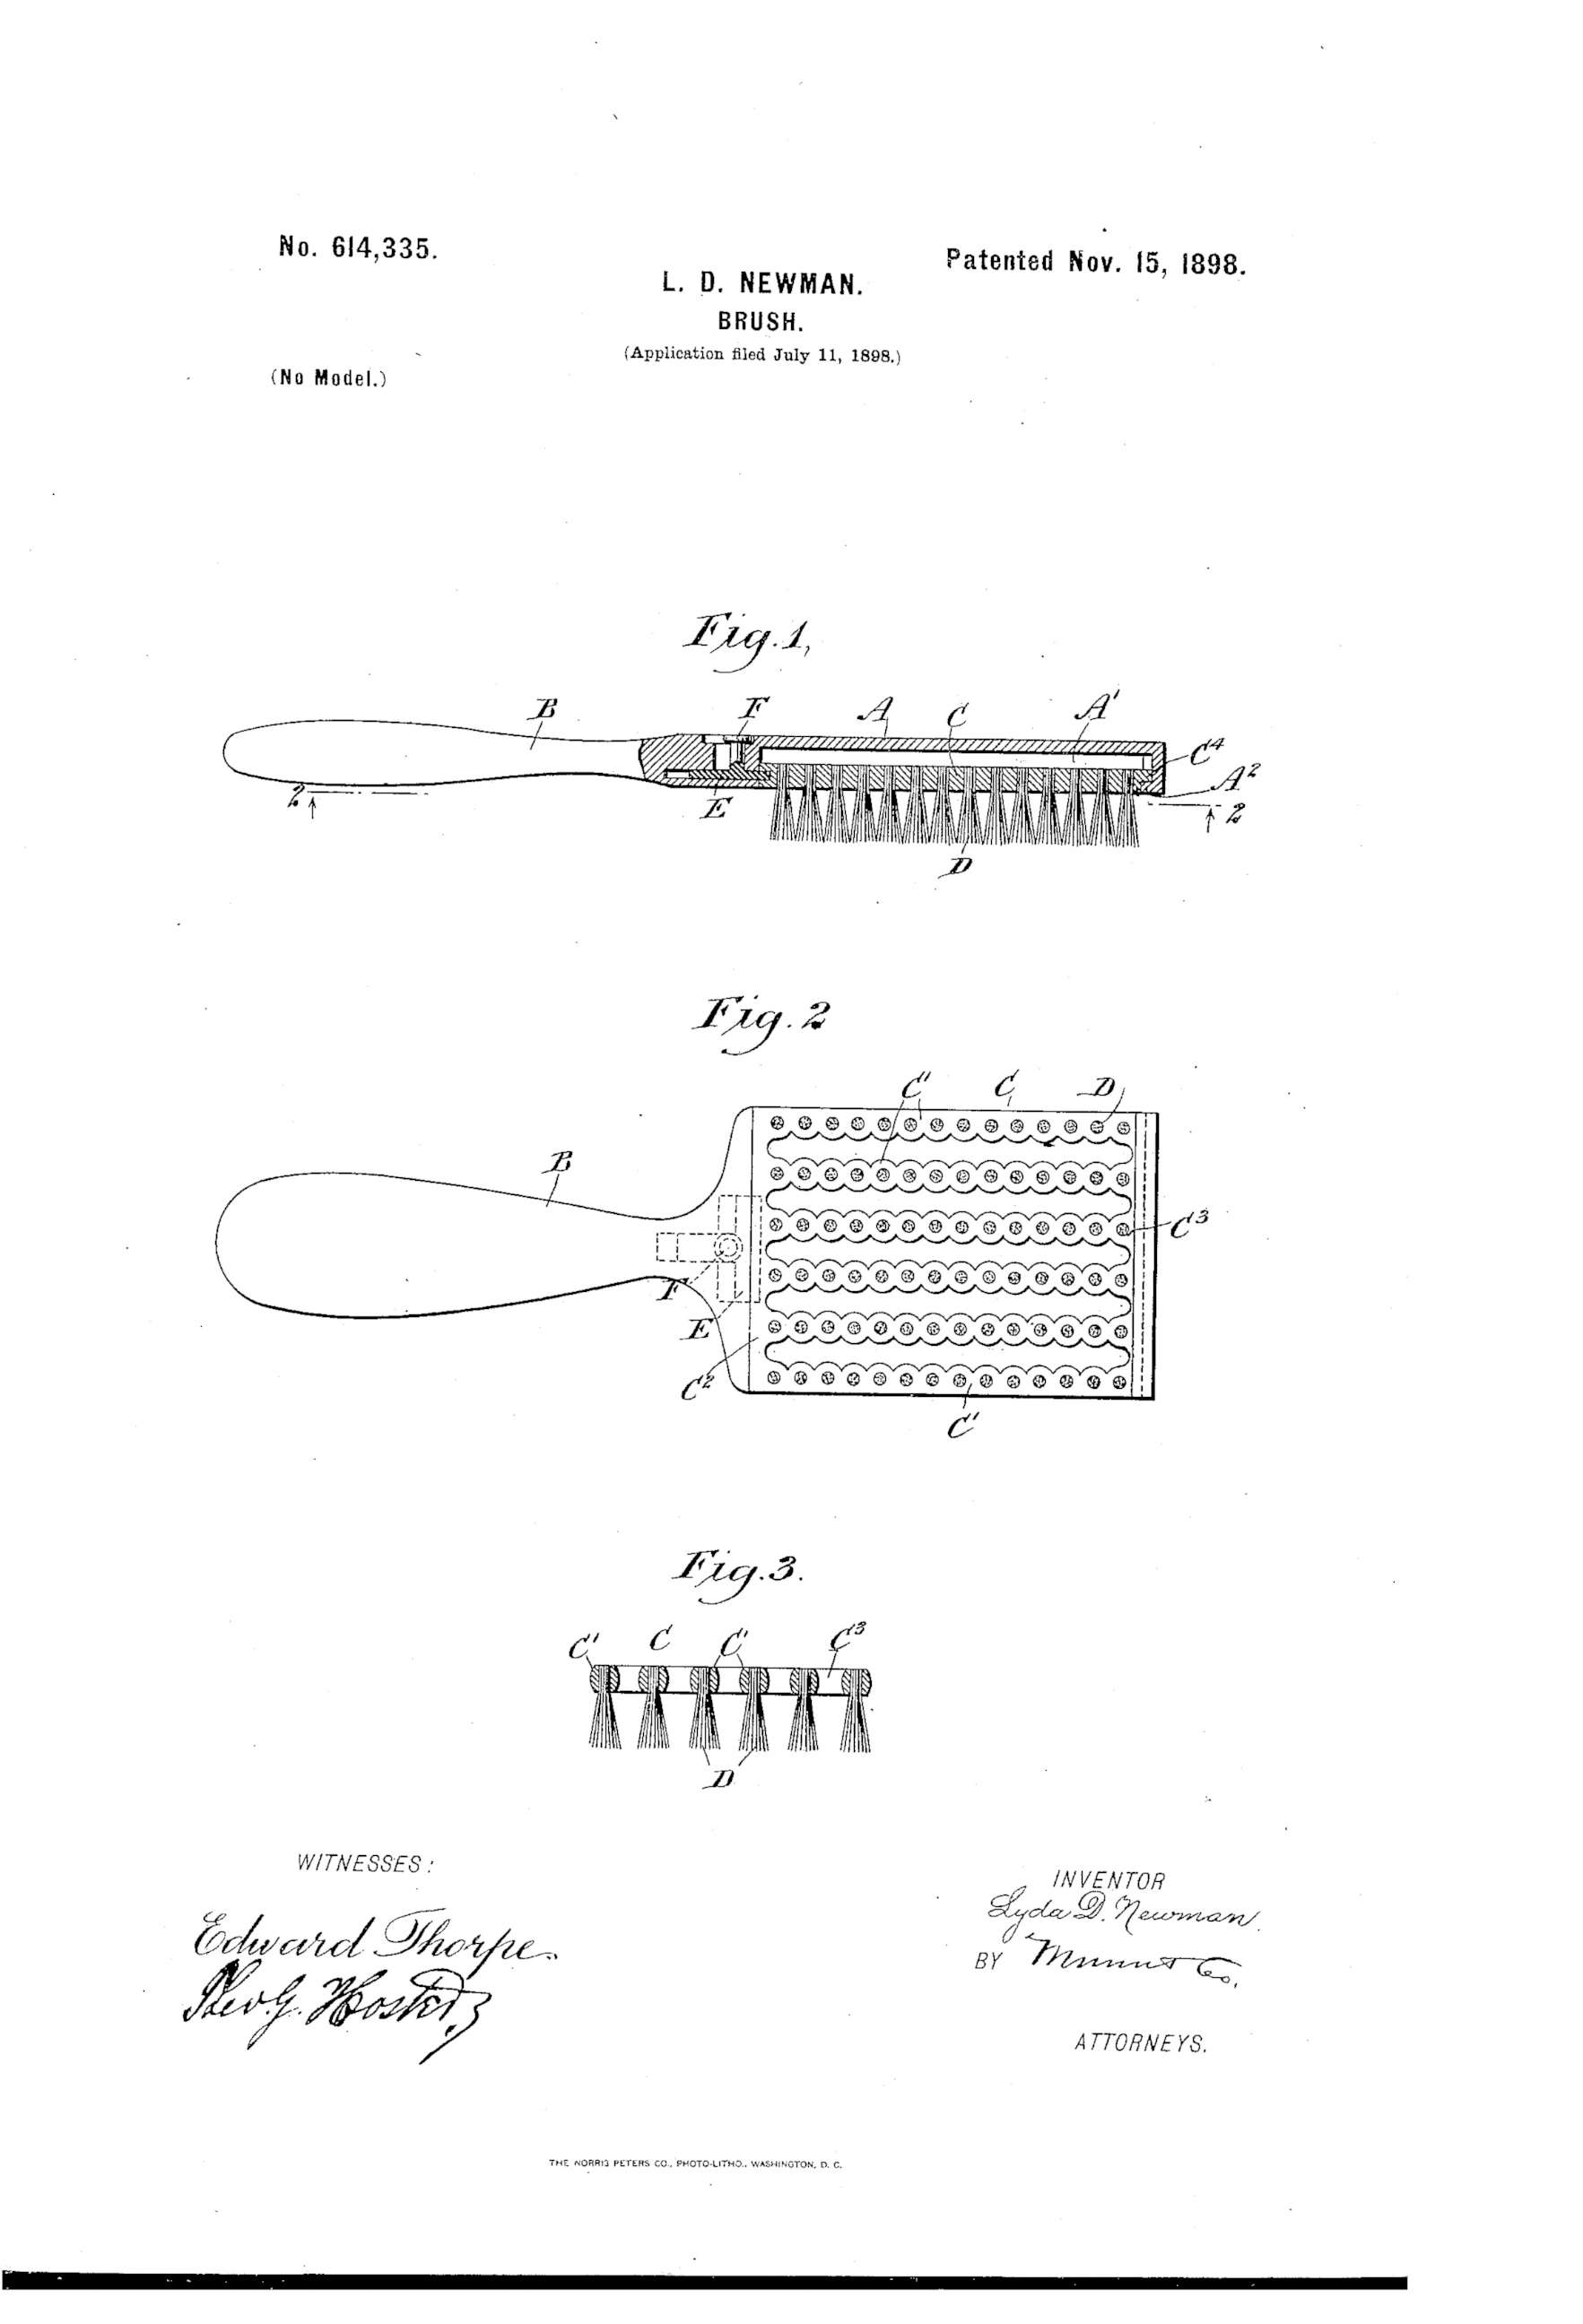 PHOTO: Lyda D. Newman's hairbrush was patented Nov. 15, 1898.